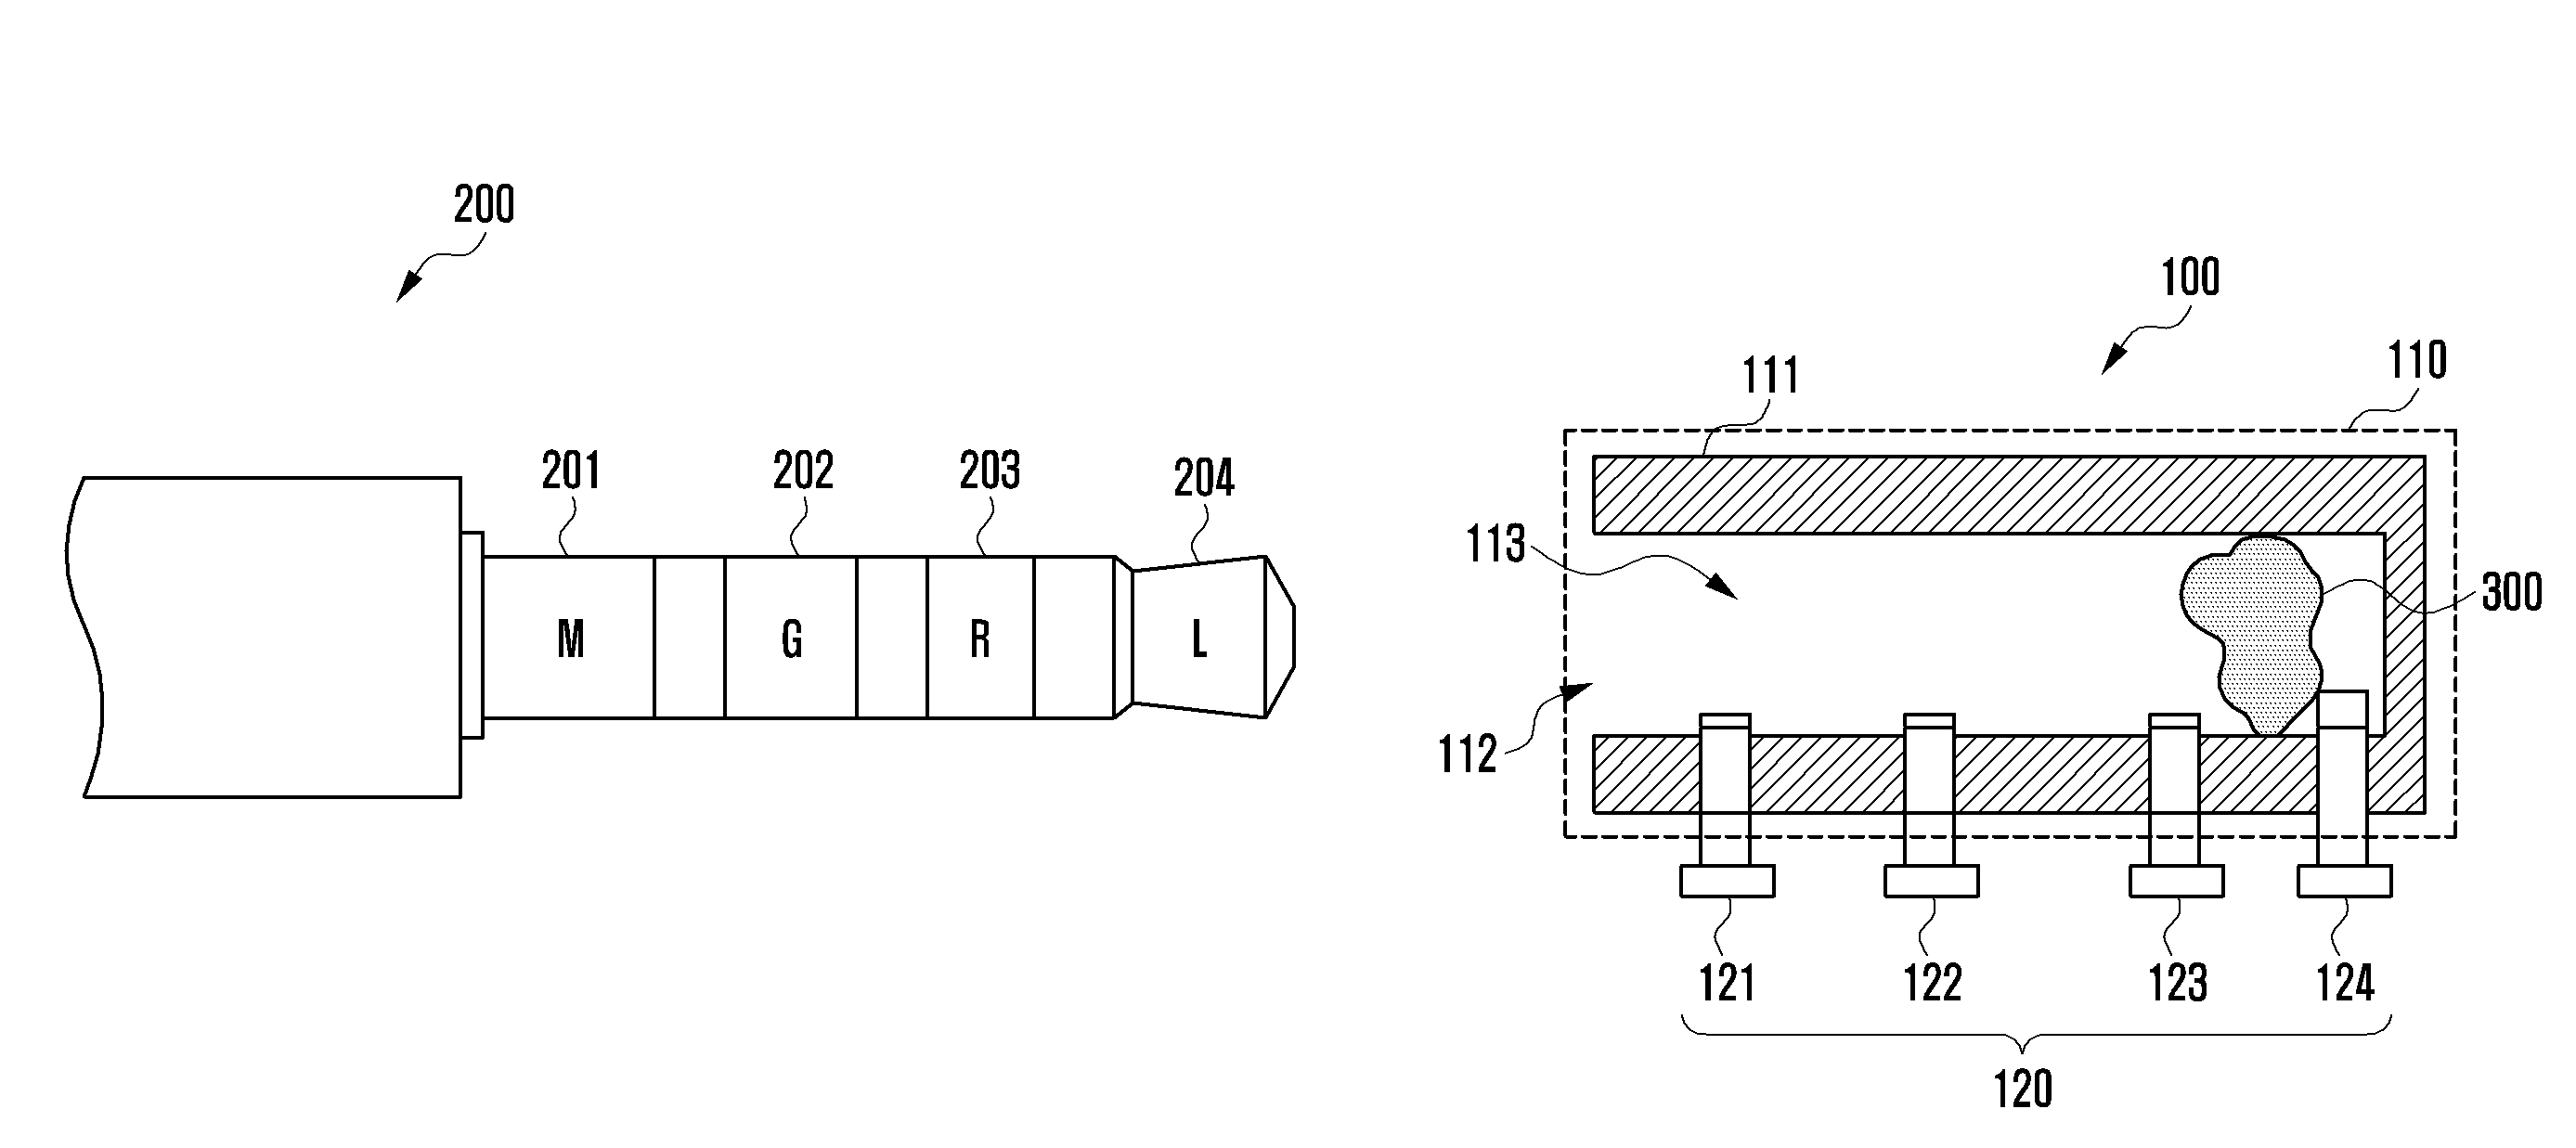 Electronic device and method of preventing erroneous recognizing inserting connector into earphone jack